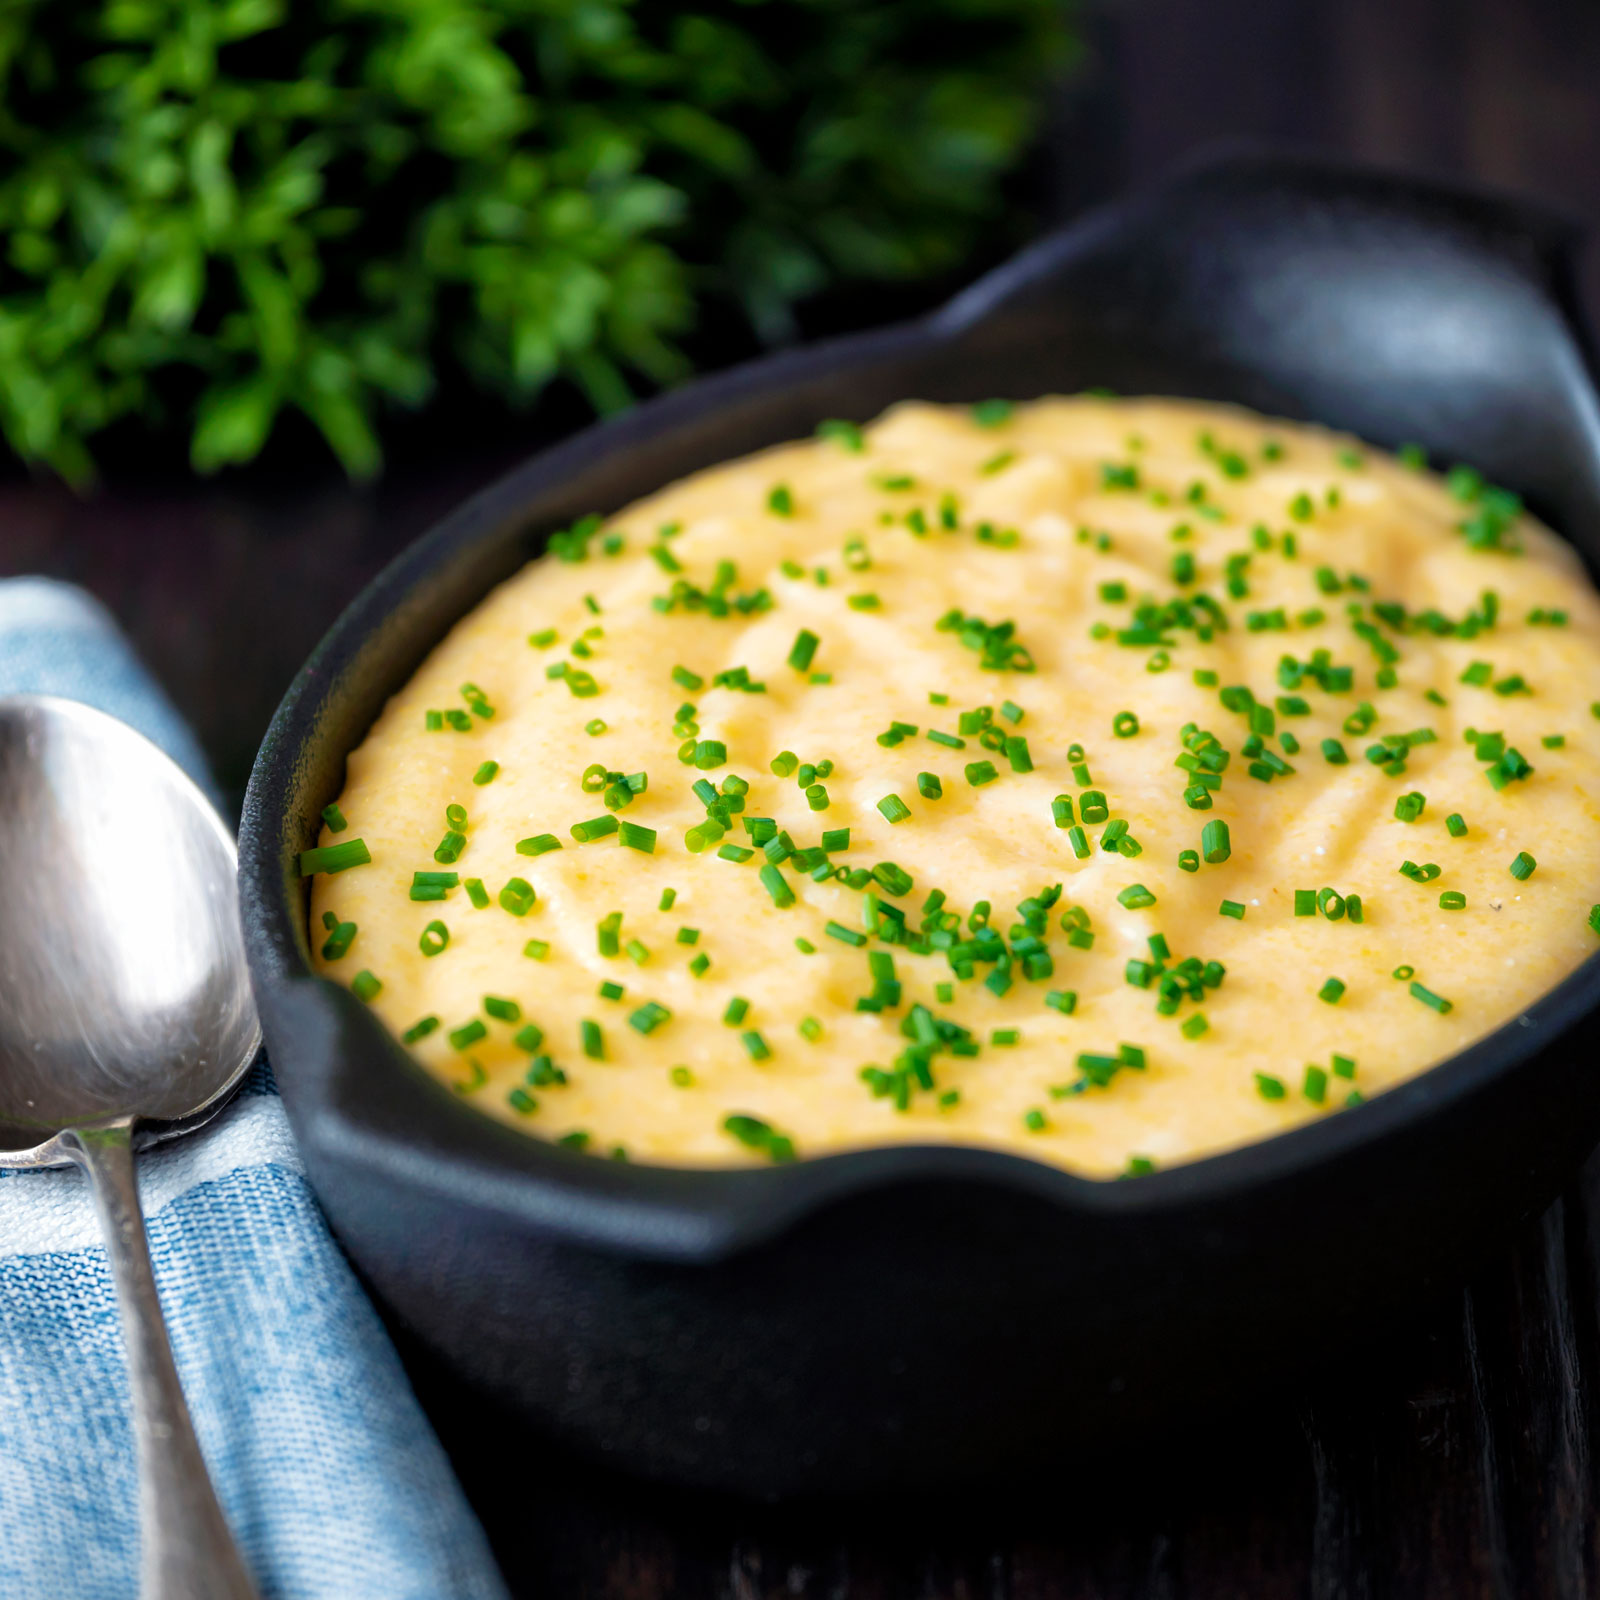 Creamy cheesy polenta garnished with snipped chives.